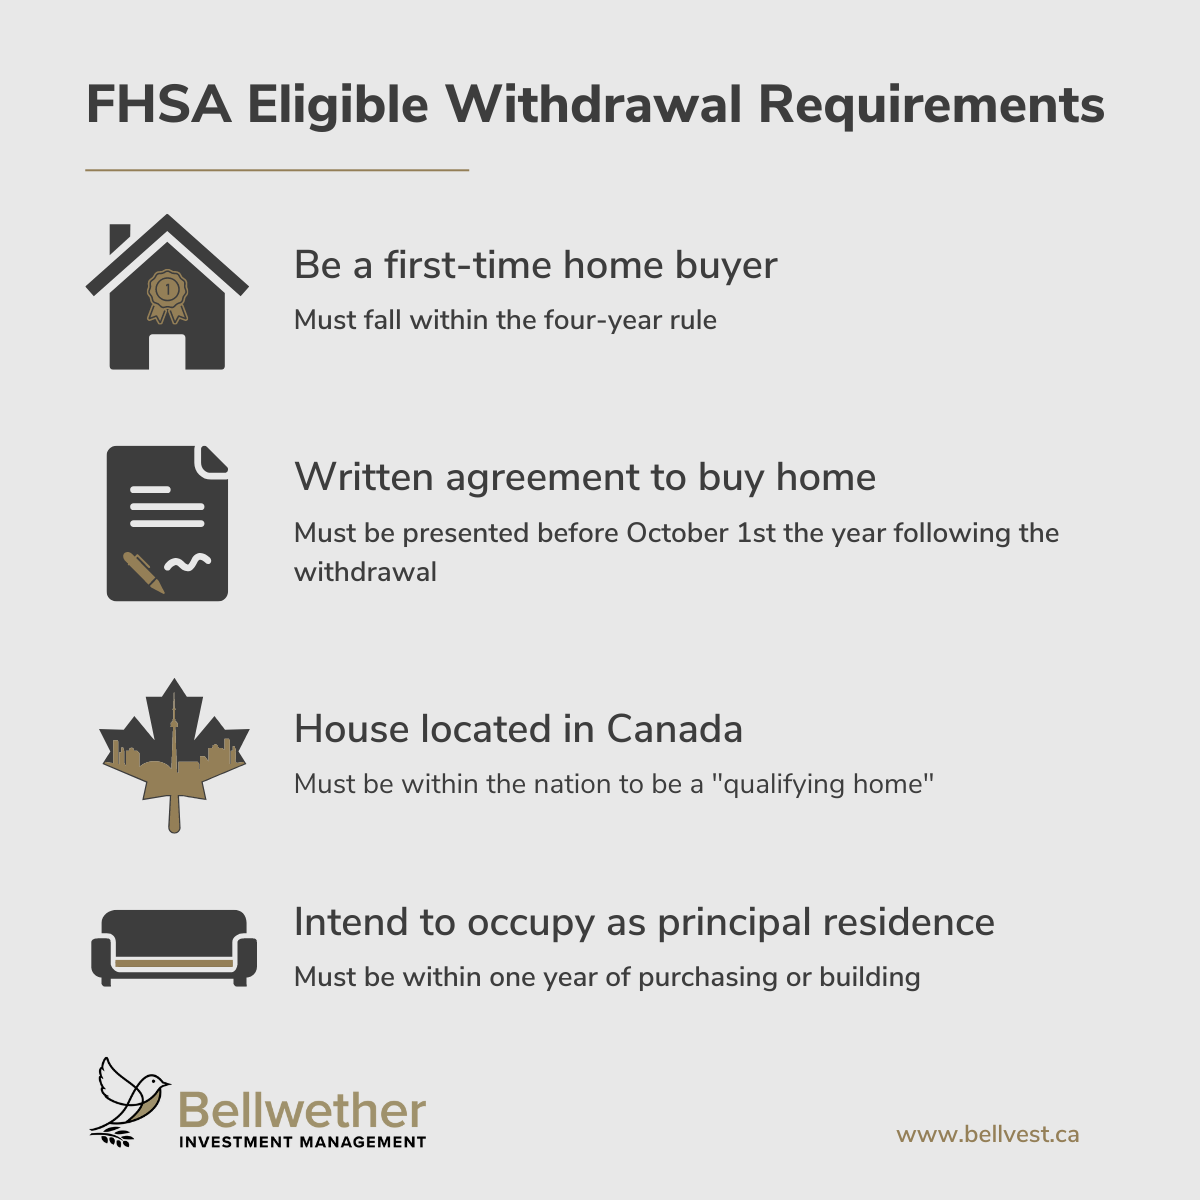 A list of requirements to make eligible wirthdrawals from the First Home Savings Plan provided by Canada. You must be a first-time home buyer, have a written agreement to buy the home, the home must be located in Canada, and you must intend to occupy it as your principal residence.